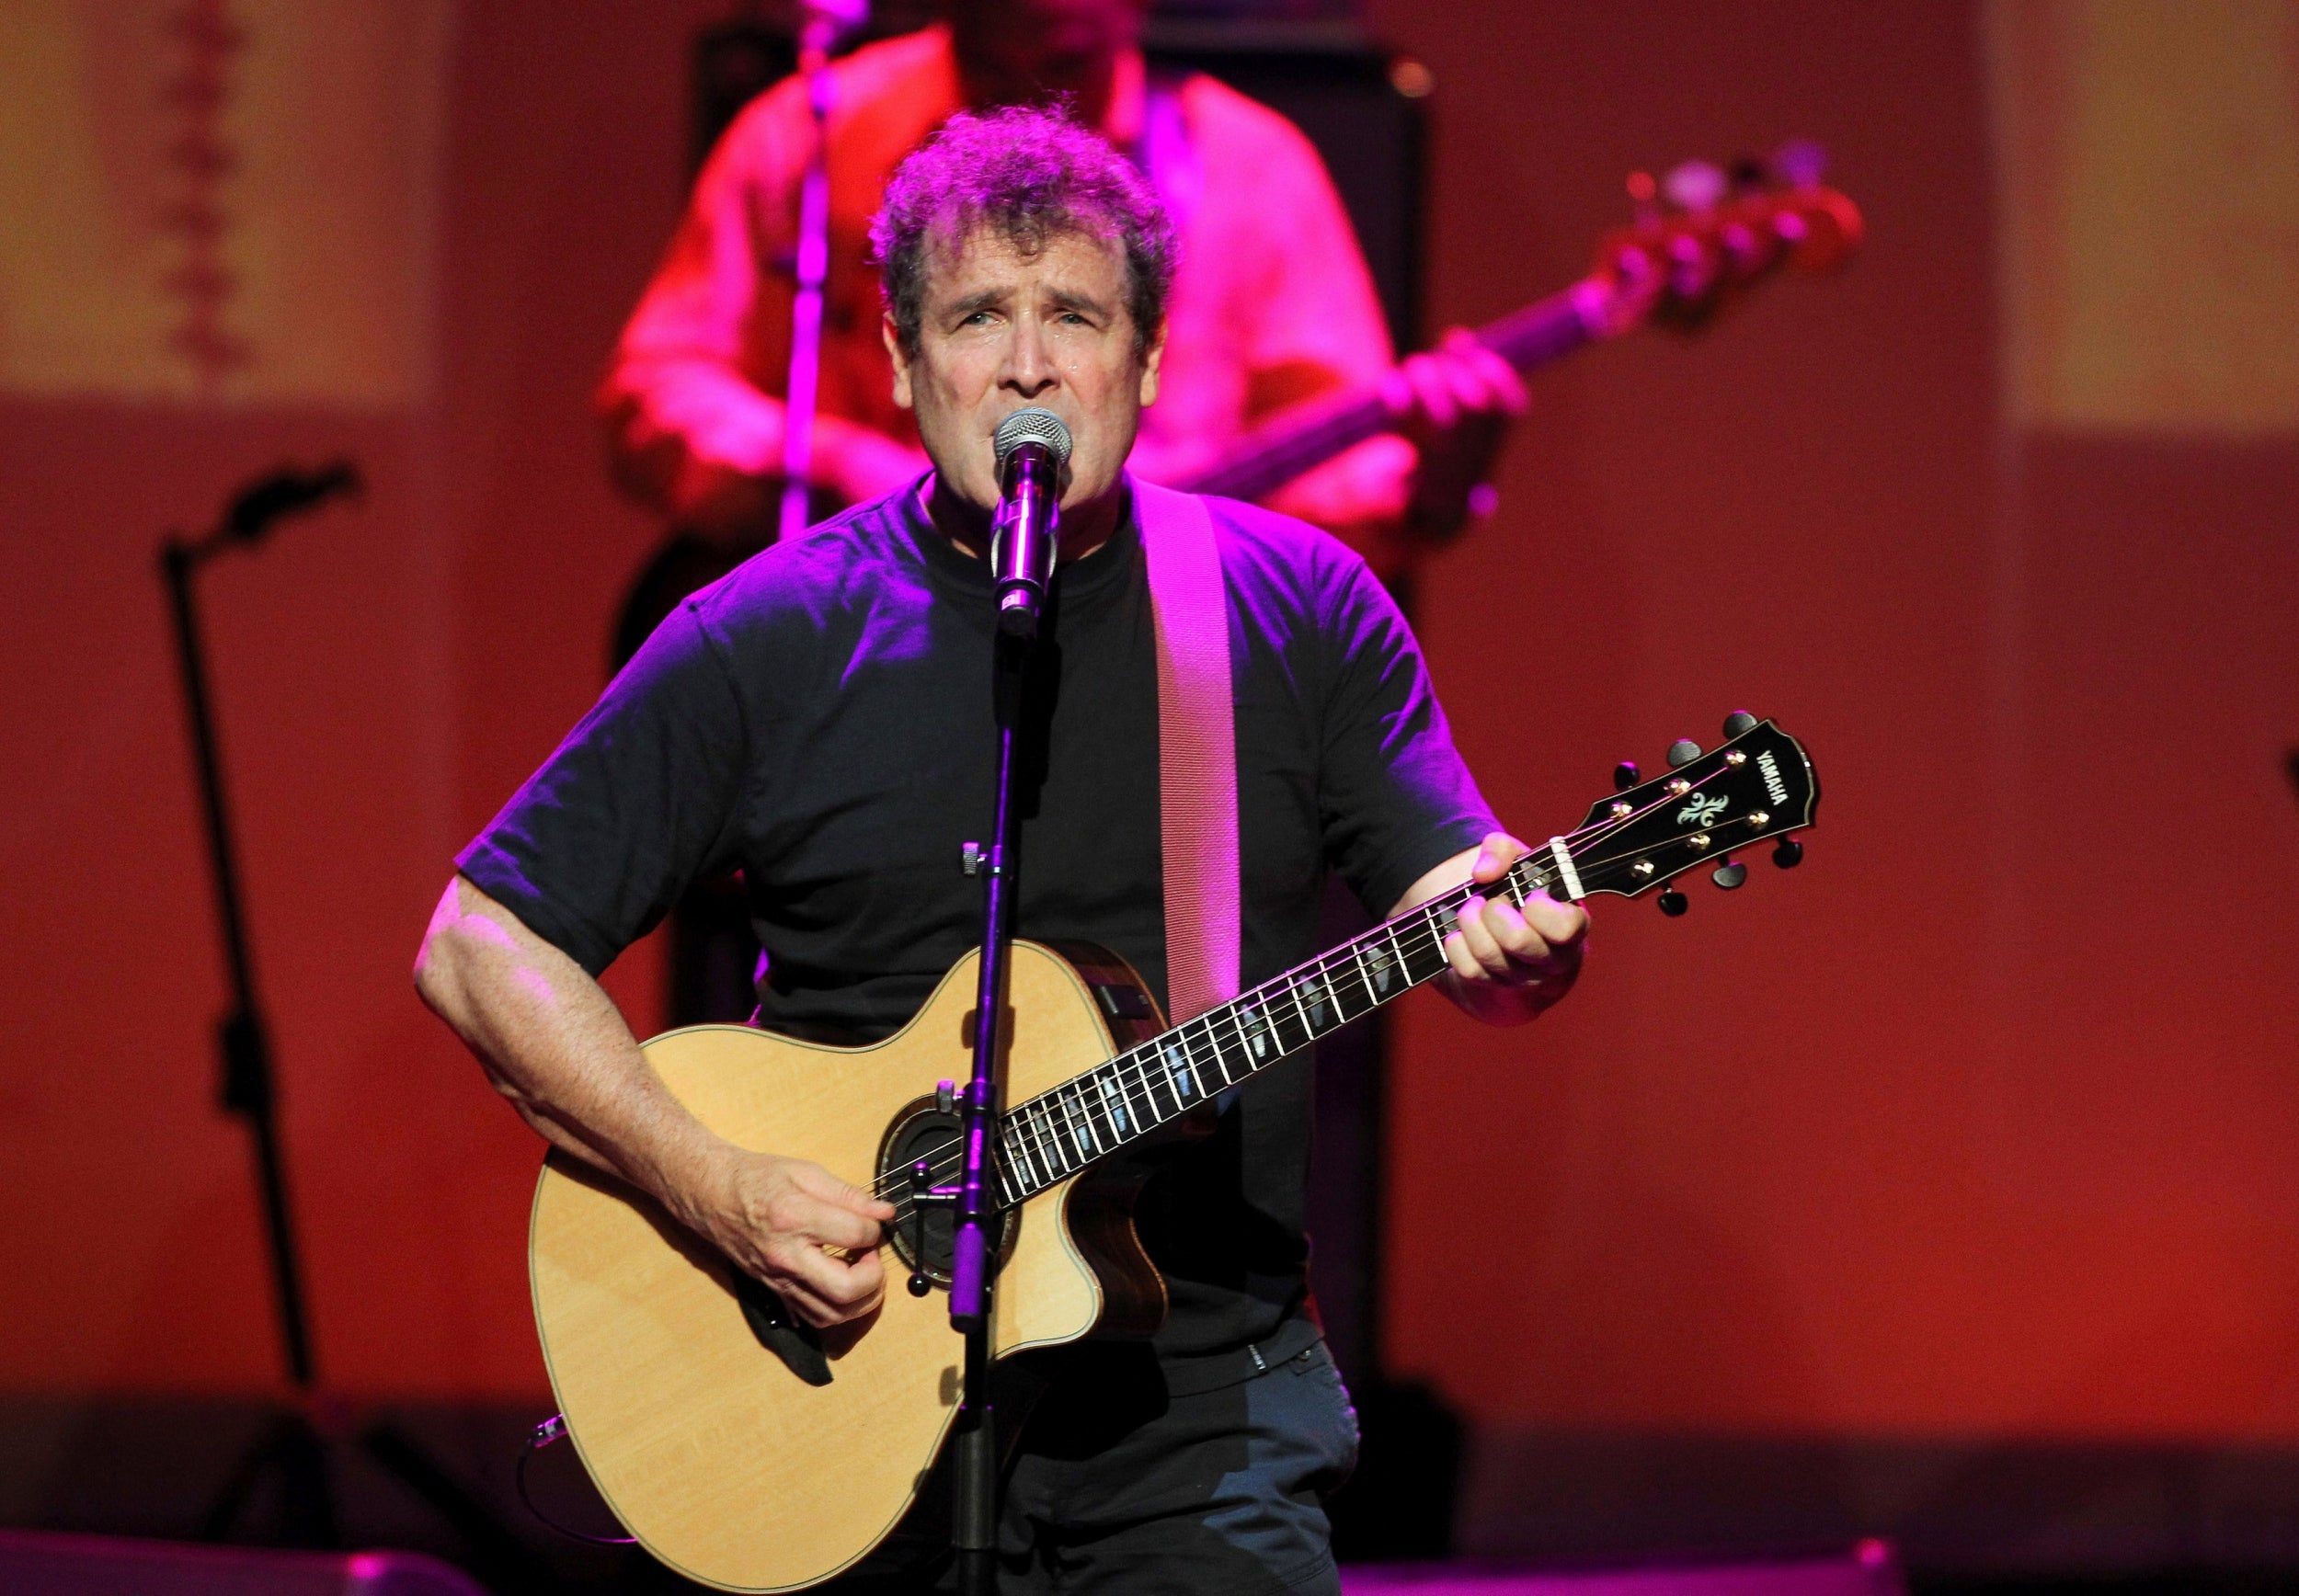 South African singer Johnny Clegg performs during the South Africa Gala night at the Monte Carlo opera, September 29, 2012